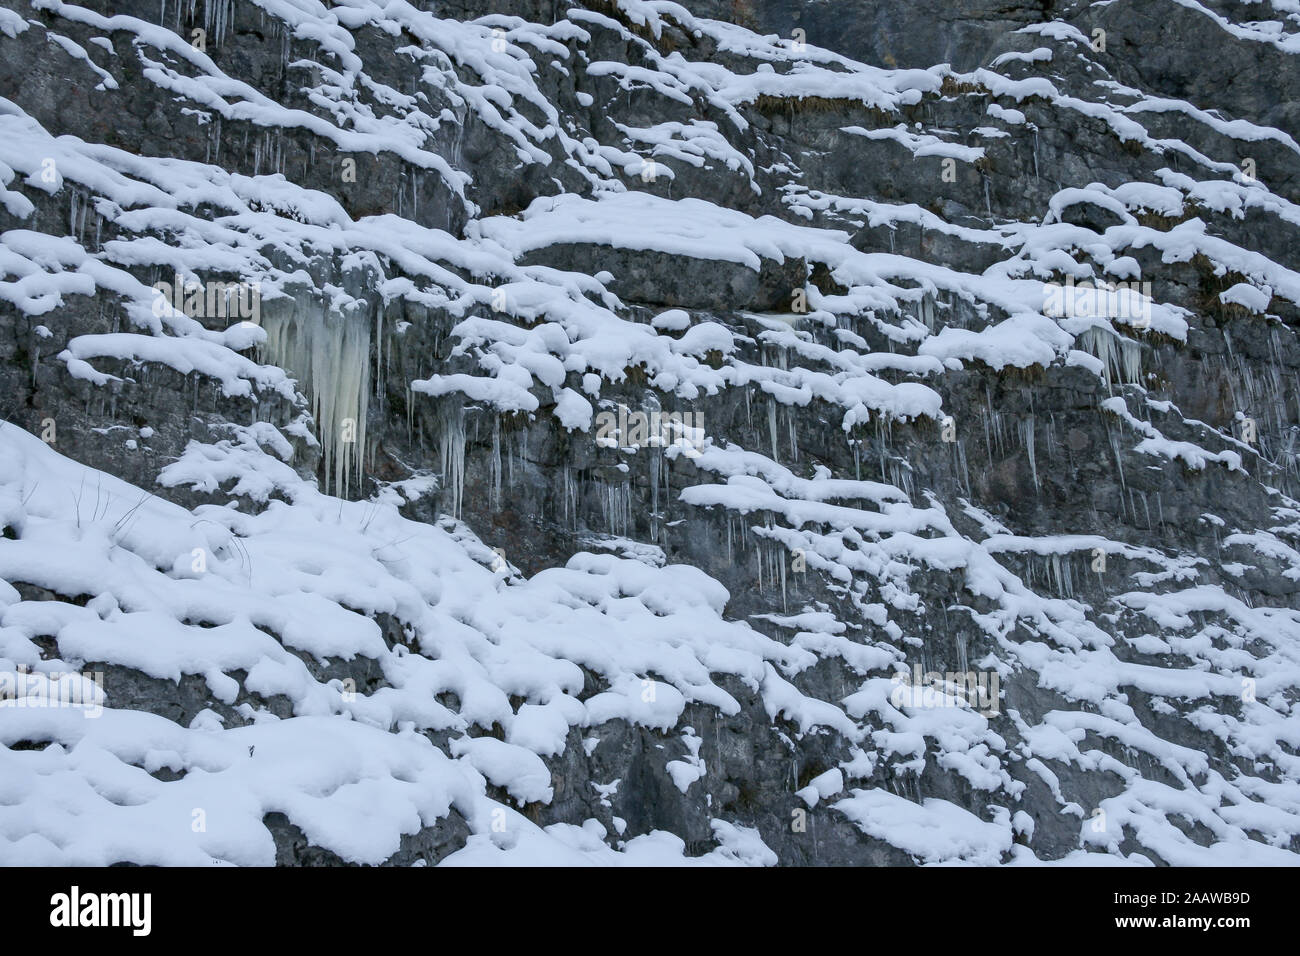 A lot of icicles have been formed due to the water rushing down the mountains and then freezing while falling down a cliff. Stock Photo